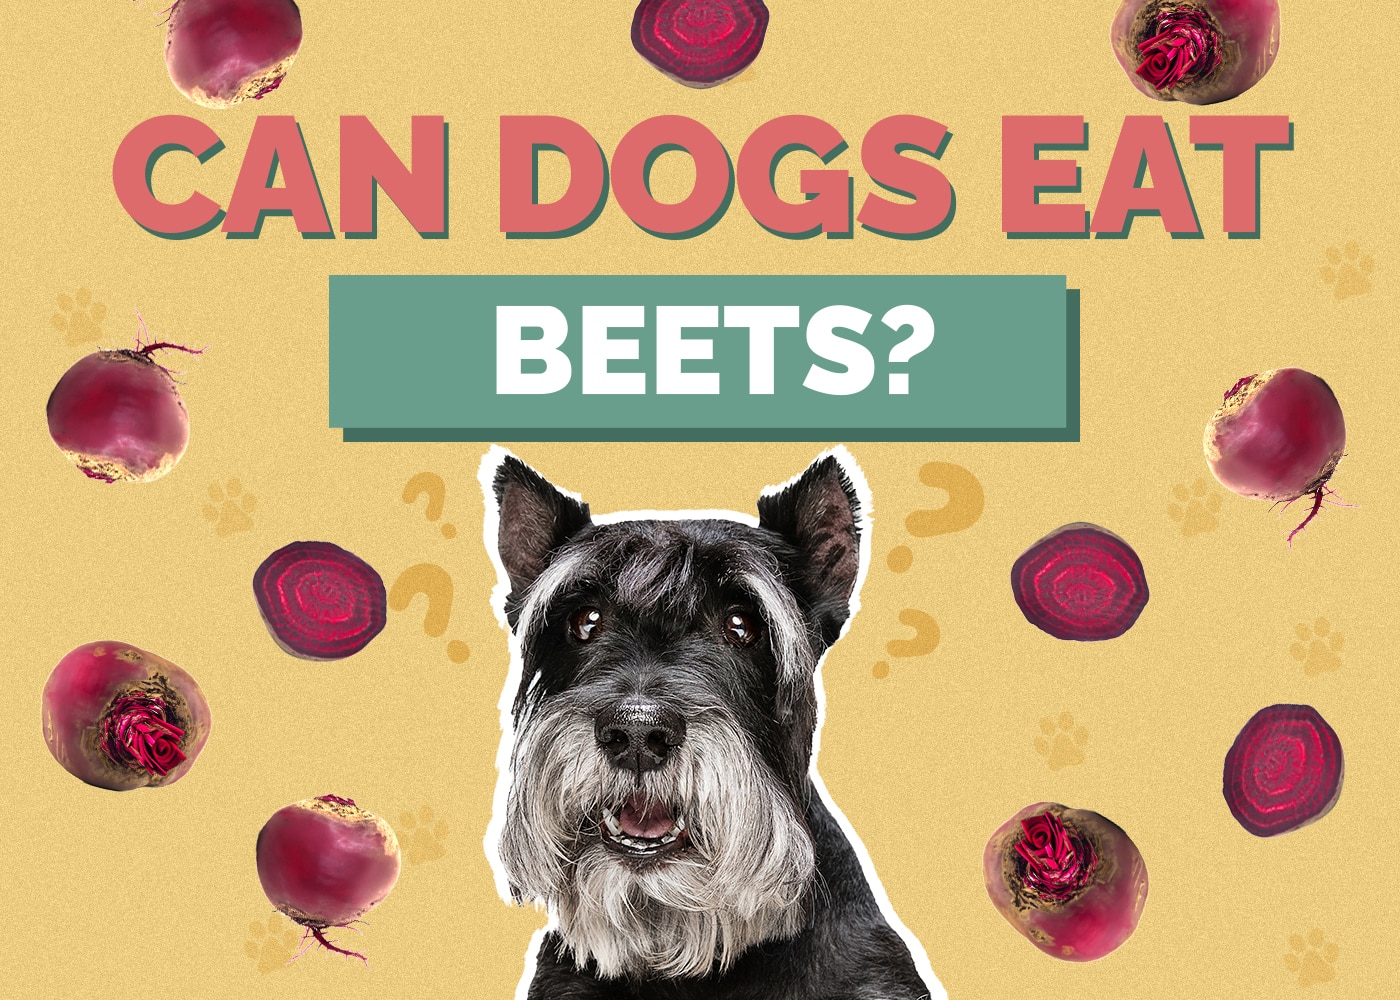 Can Dog Eat beets